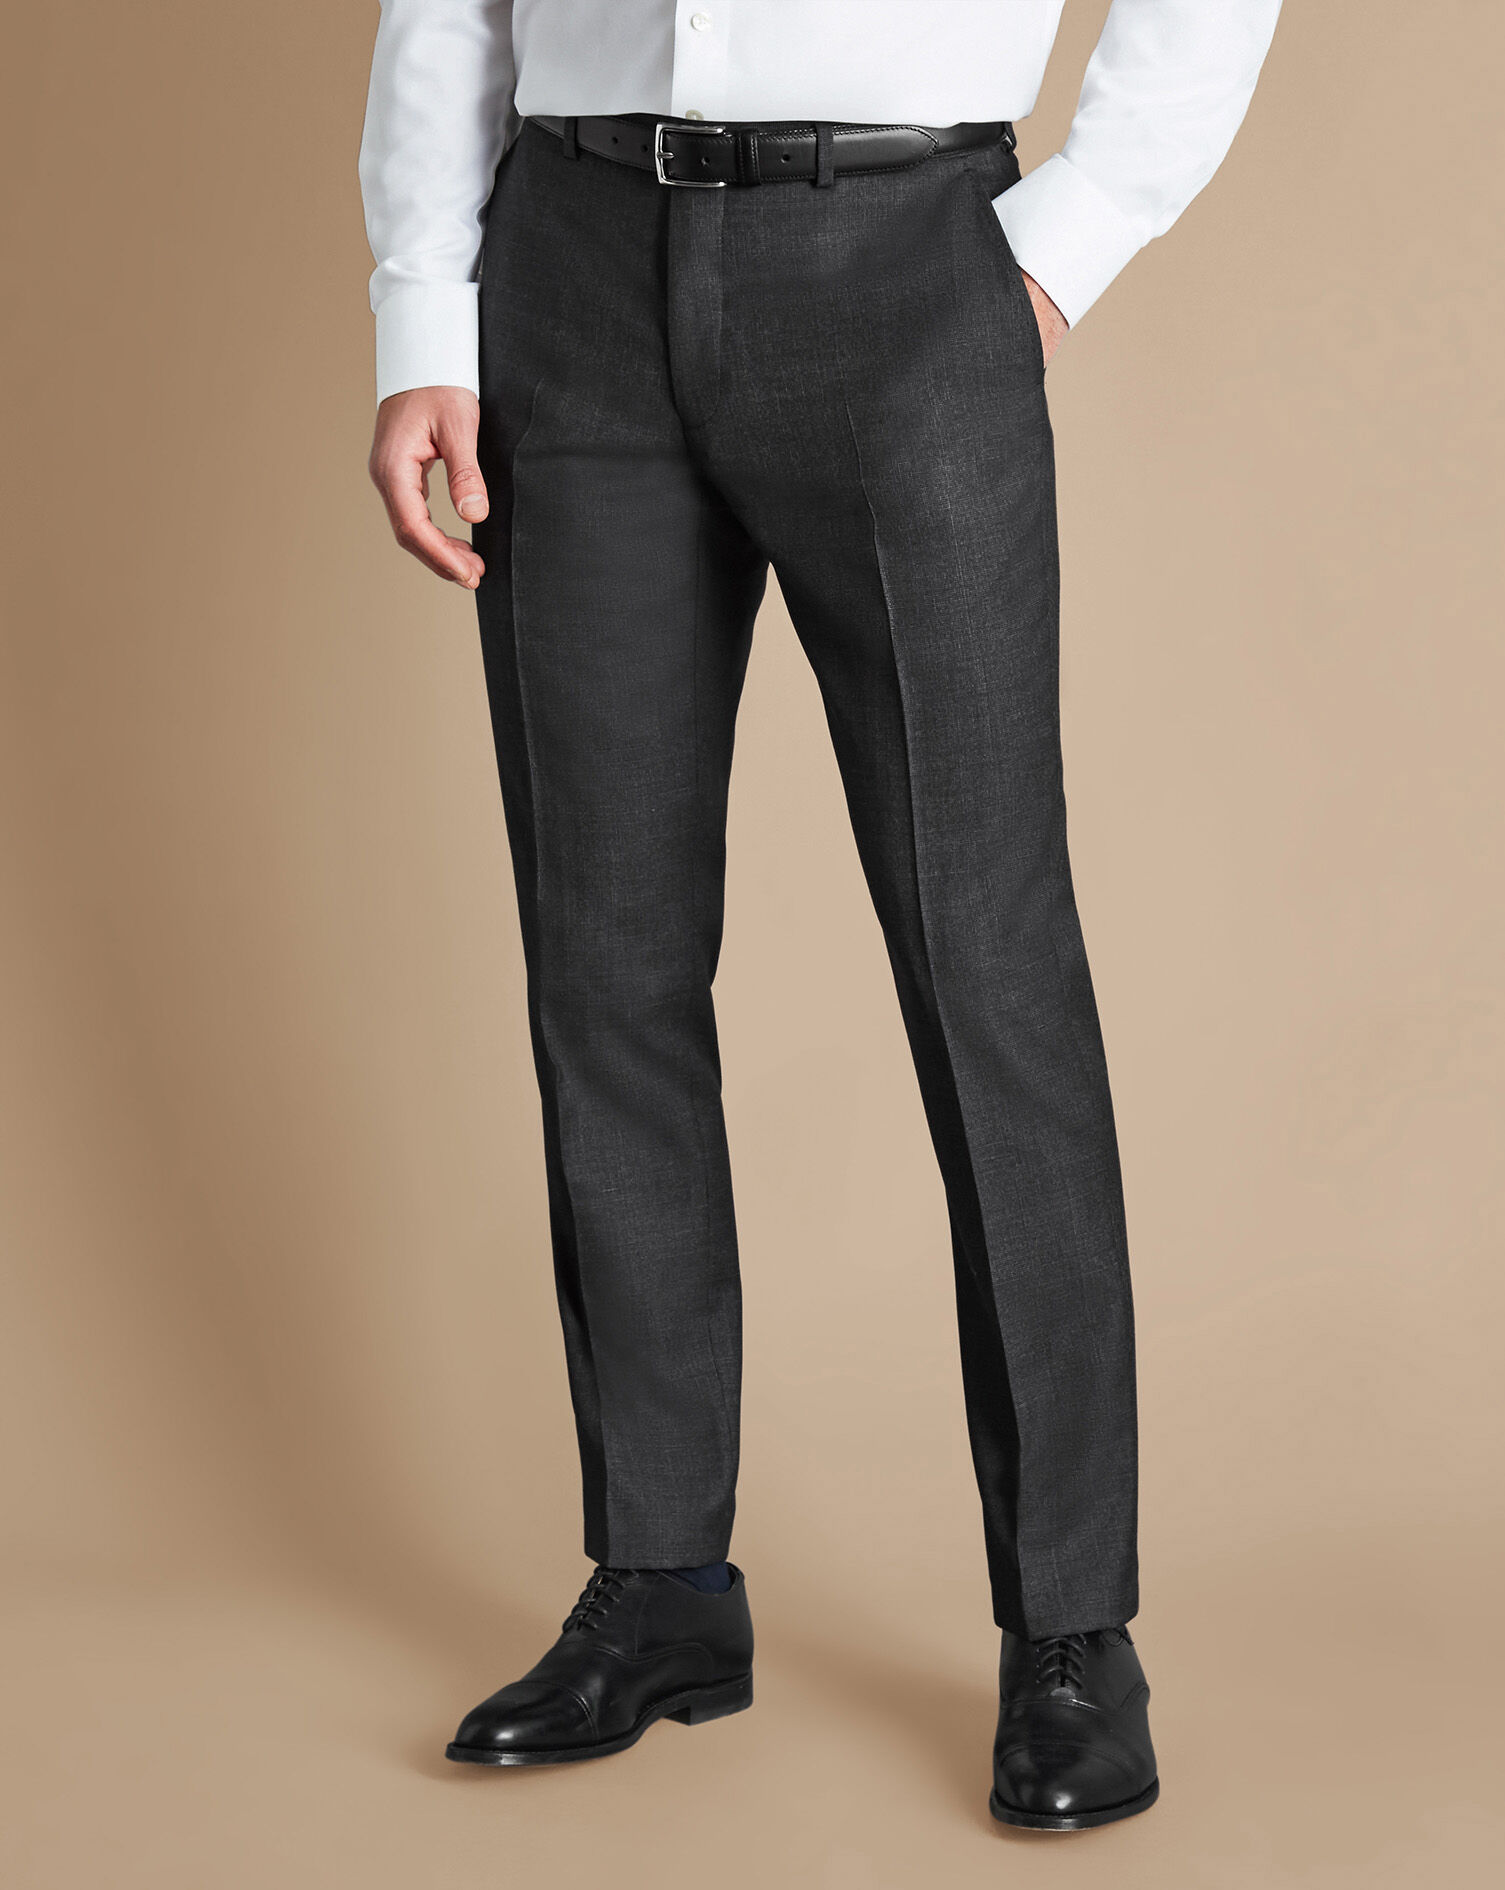 Articles of Style | HOW IT SHOULD FIT: THE TROUSER